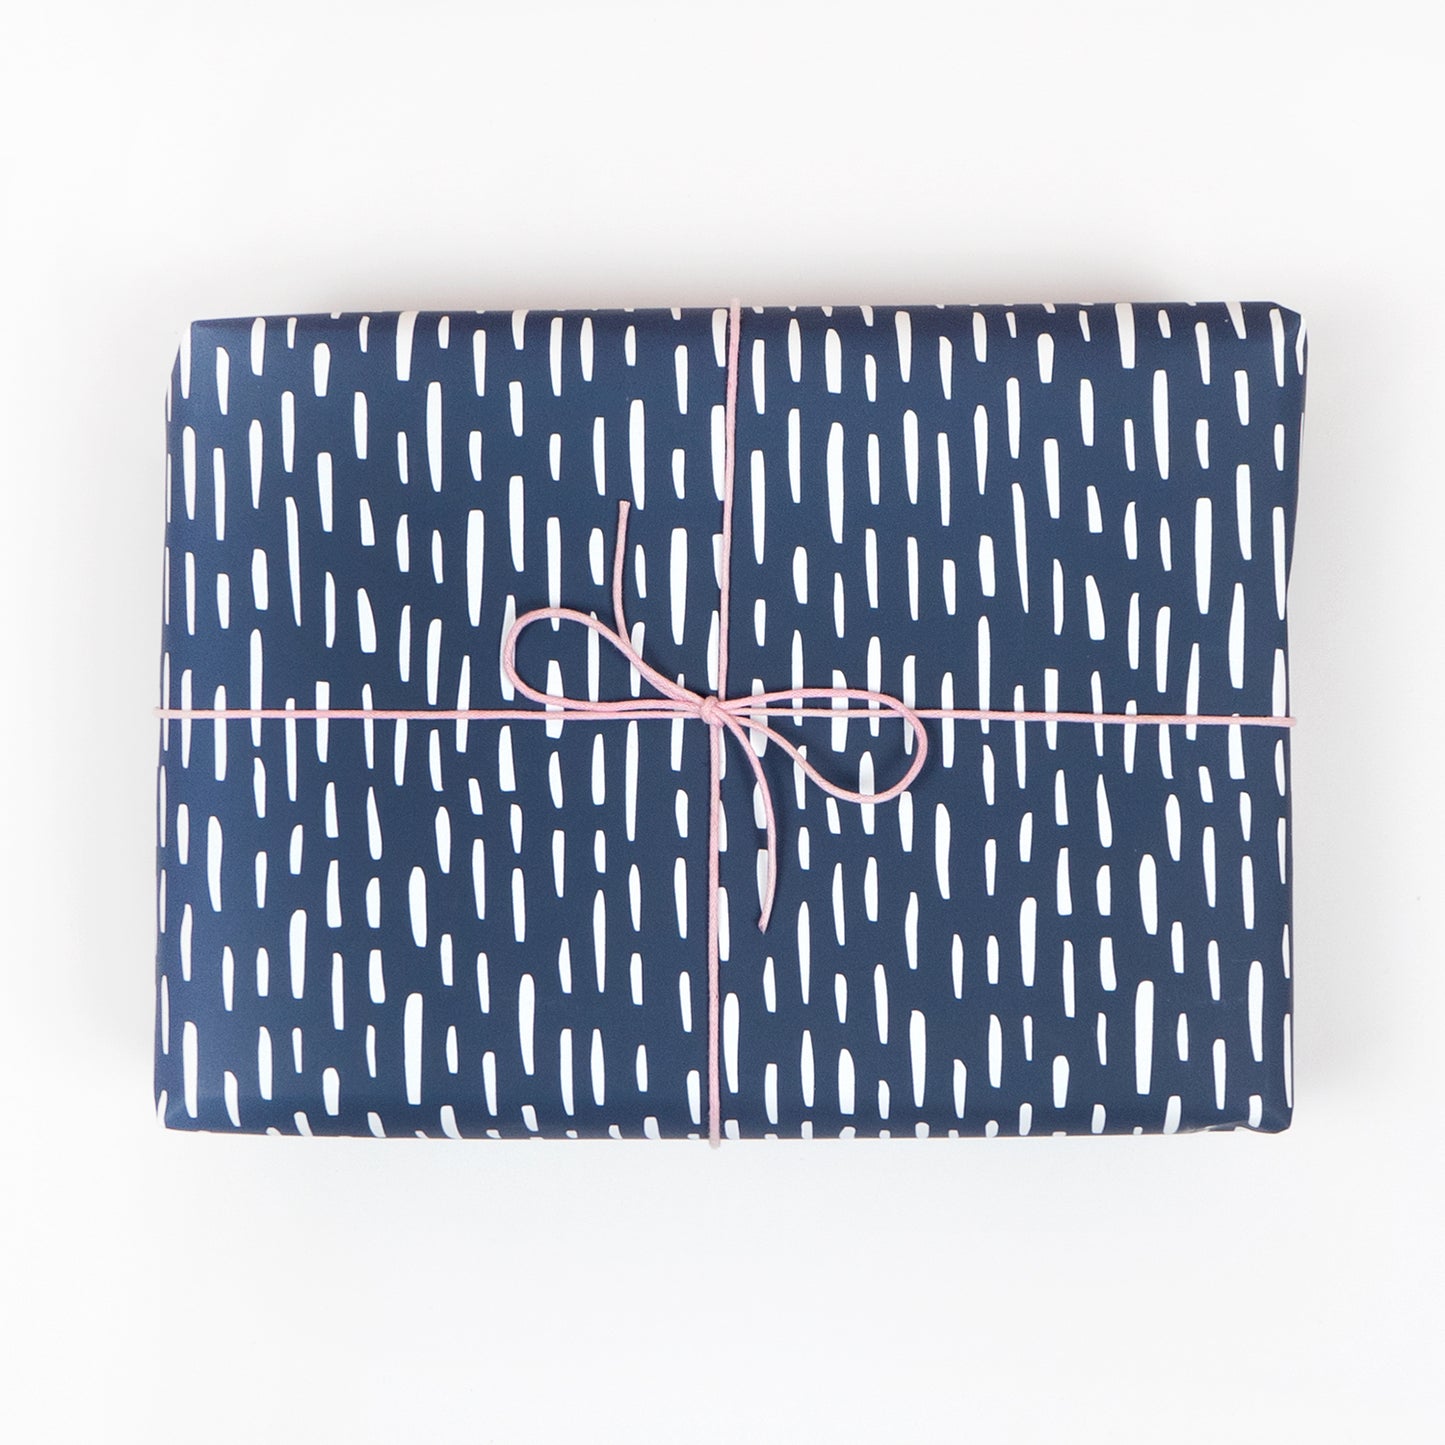 Cascade Wrapping Paper